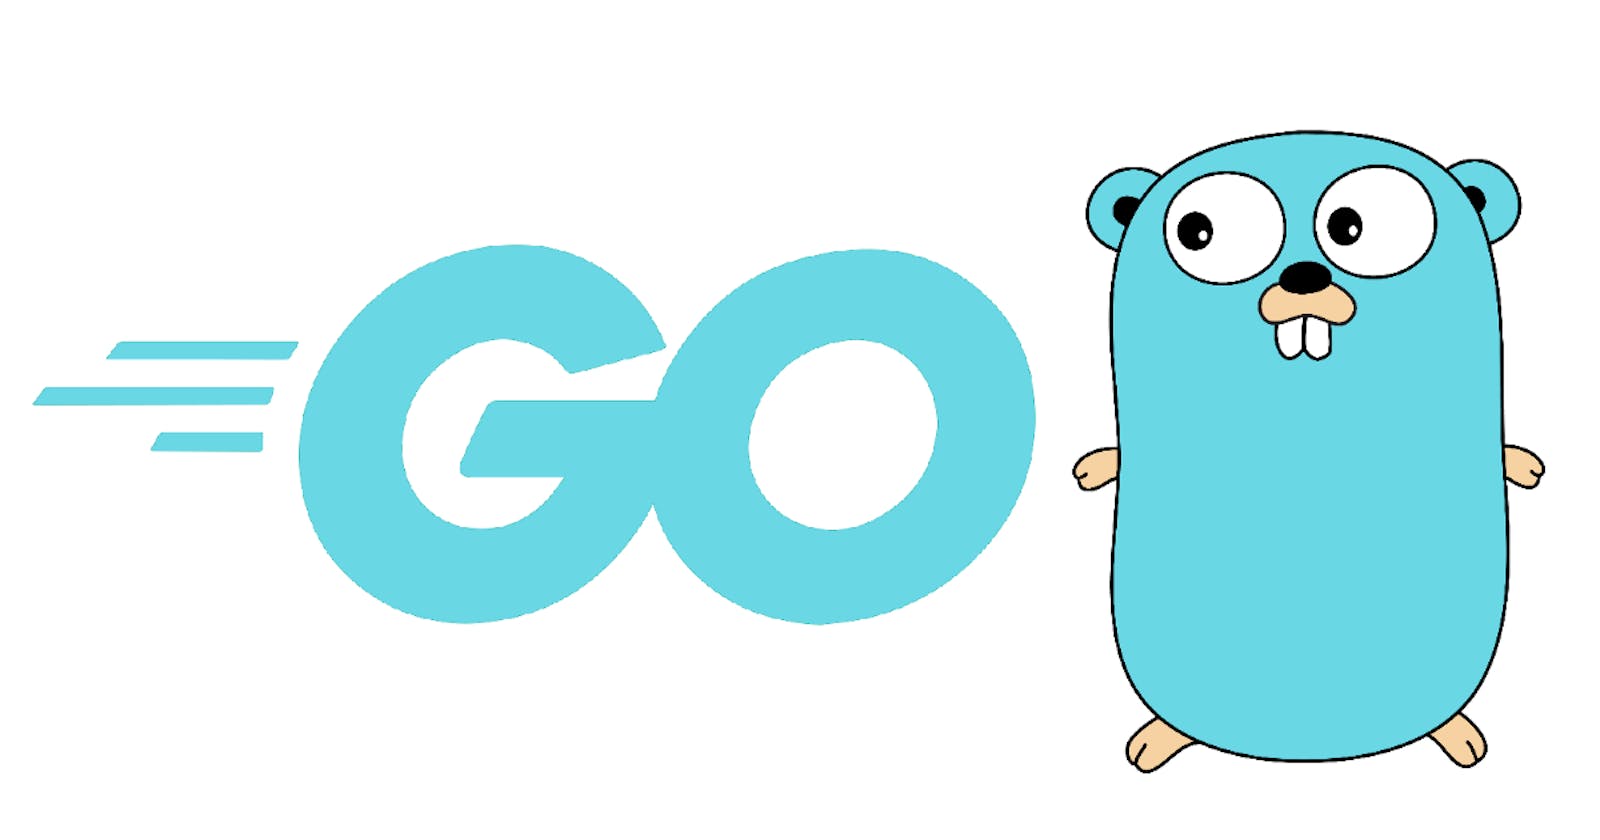 Consuming a REST API with Go